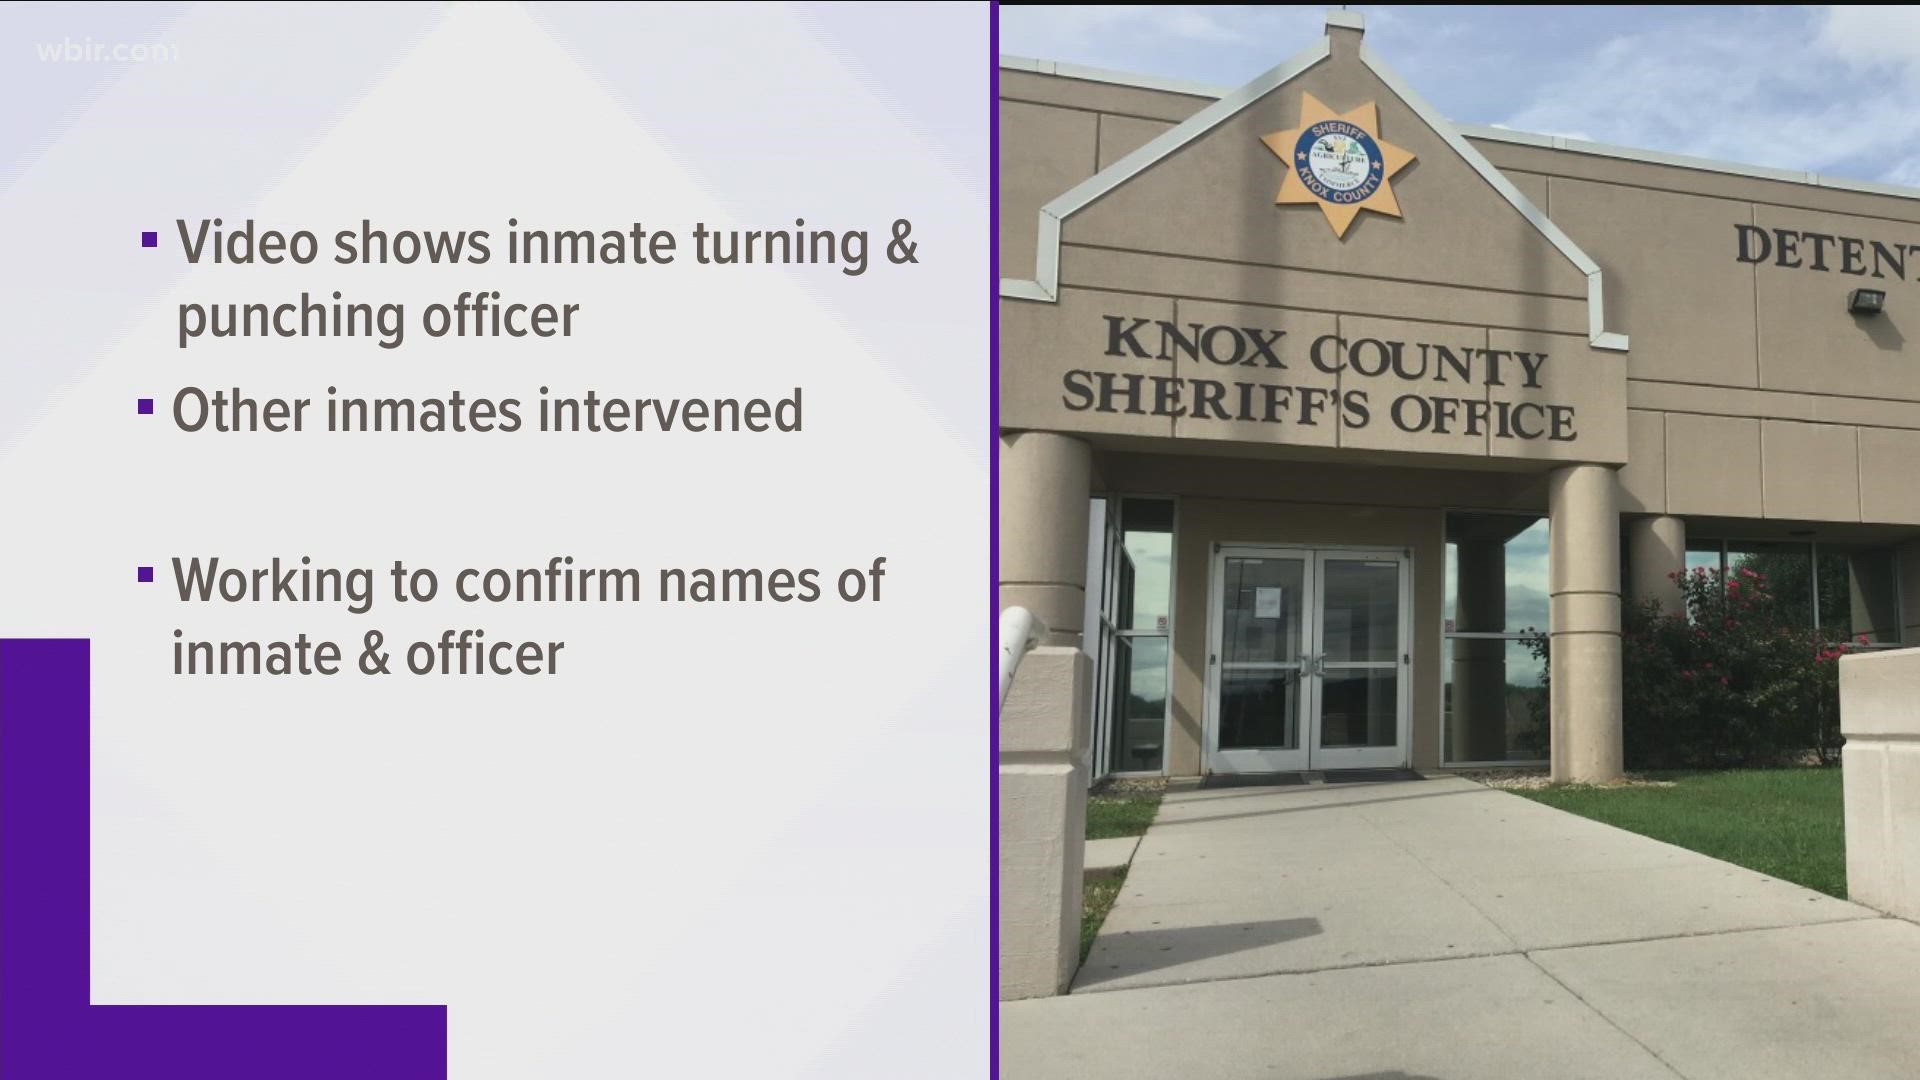 The attack happened Oct. 6 at the Roger D. Wilson Detention Facility, Knox County's main holding center.